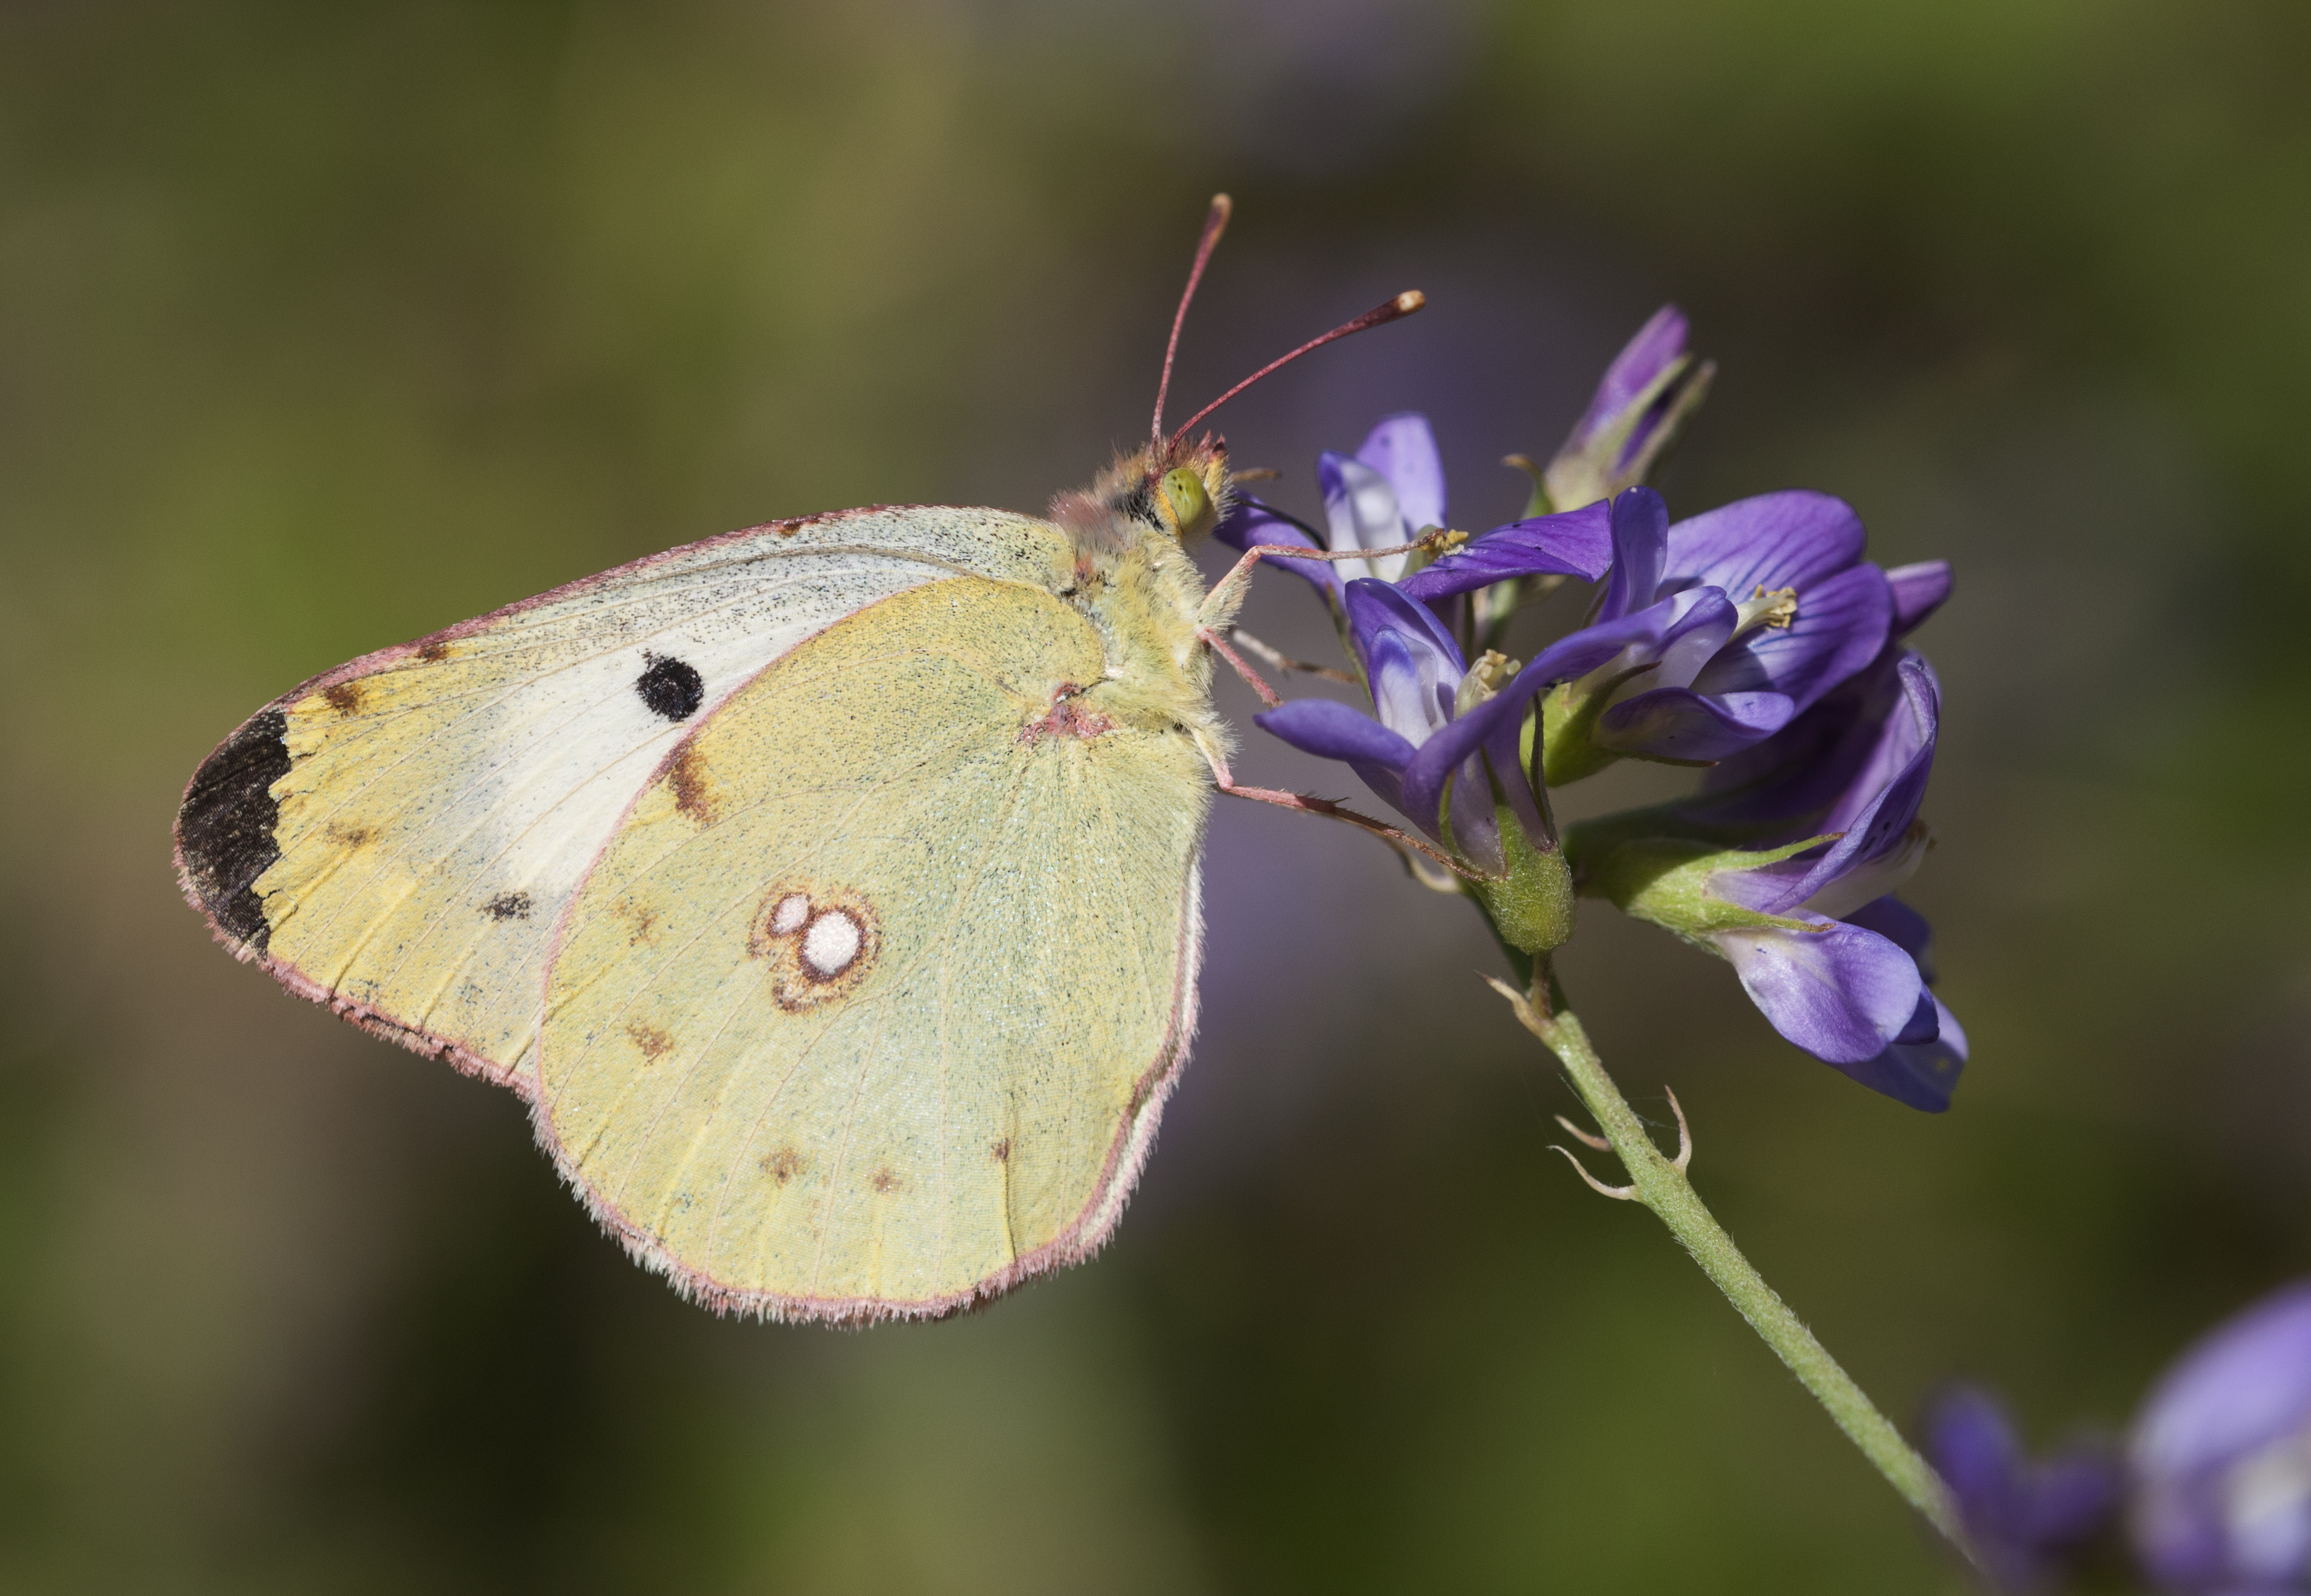 Colias alfacariensis, Berger's clouded yellow butterfly by Zeynel Cebeci